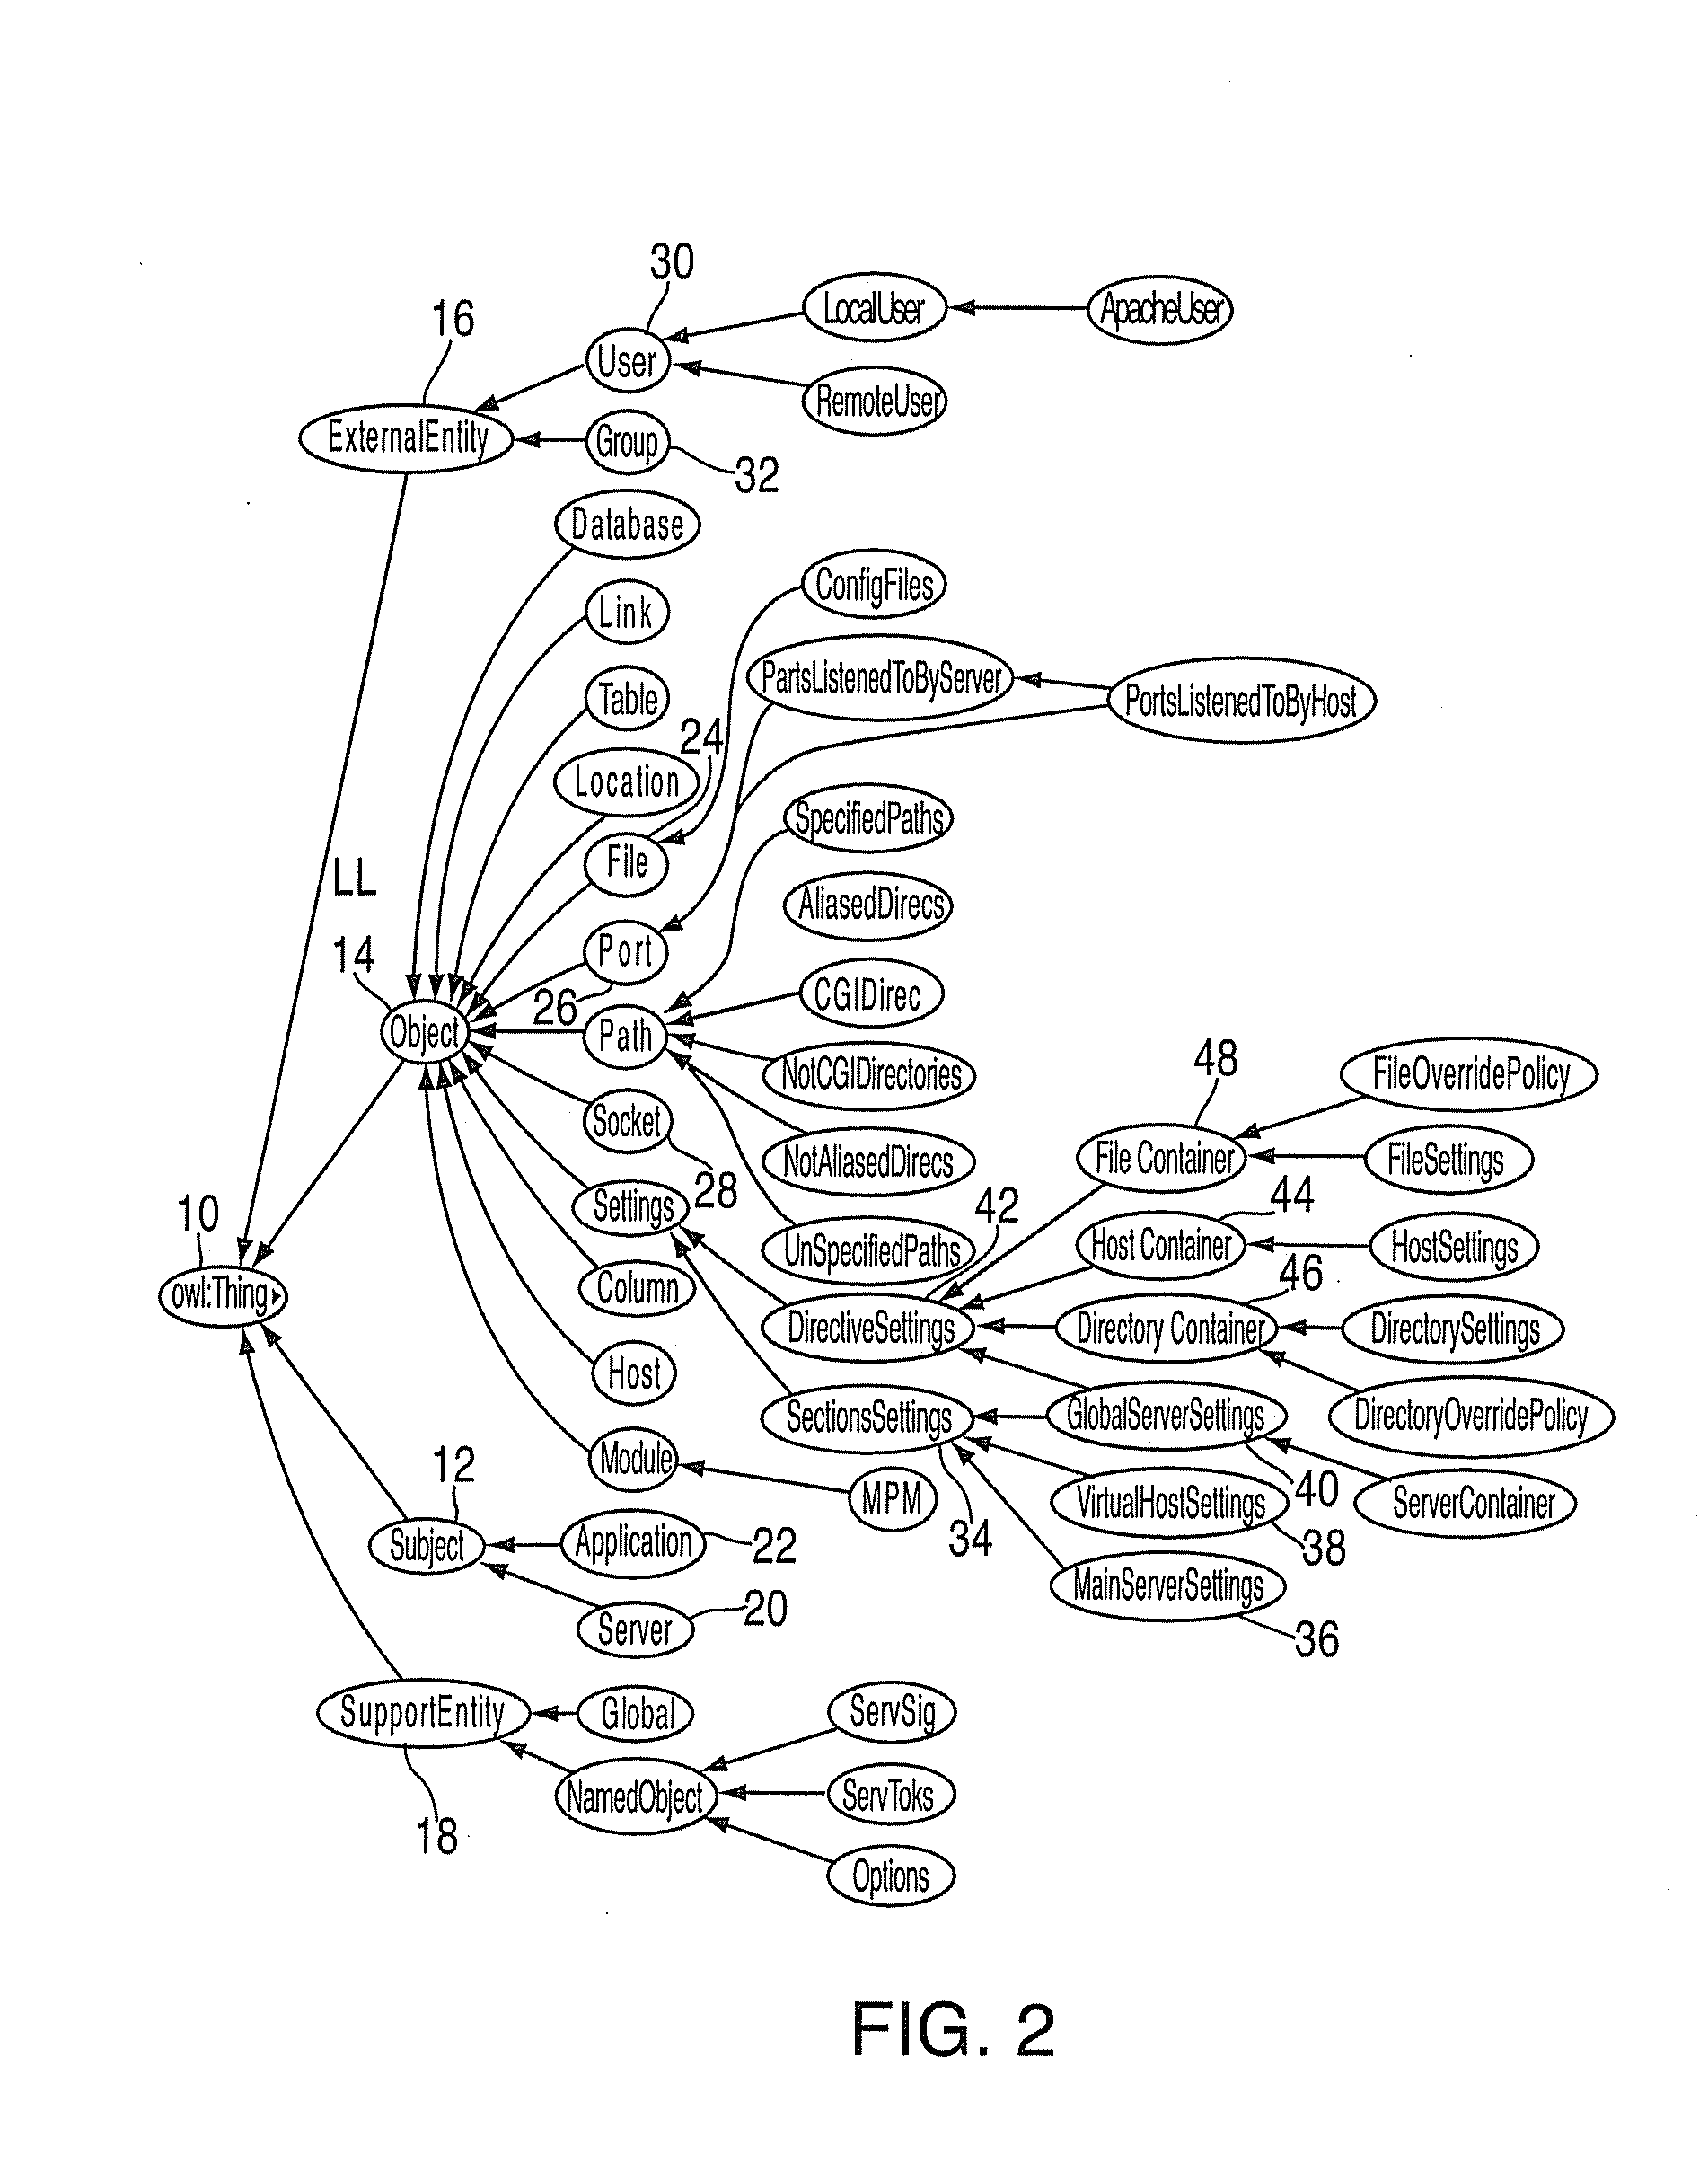 Method and apparatus for configuration modelling and consistency checking of web applications